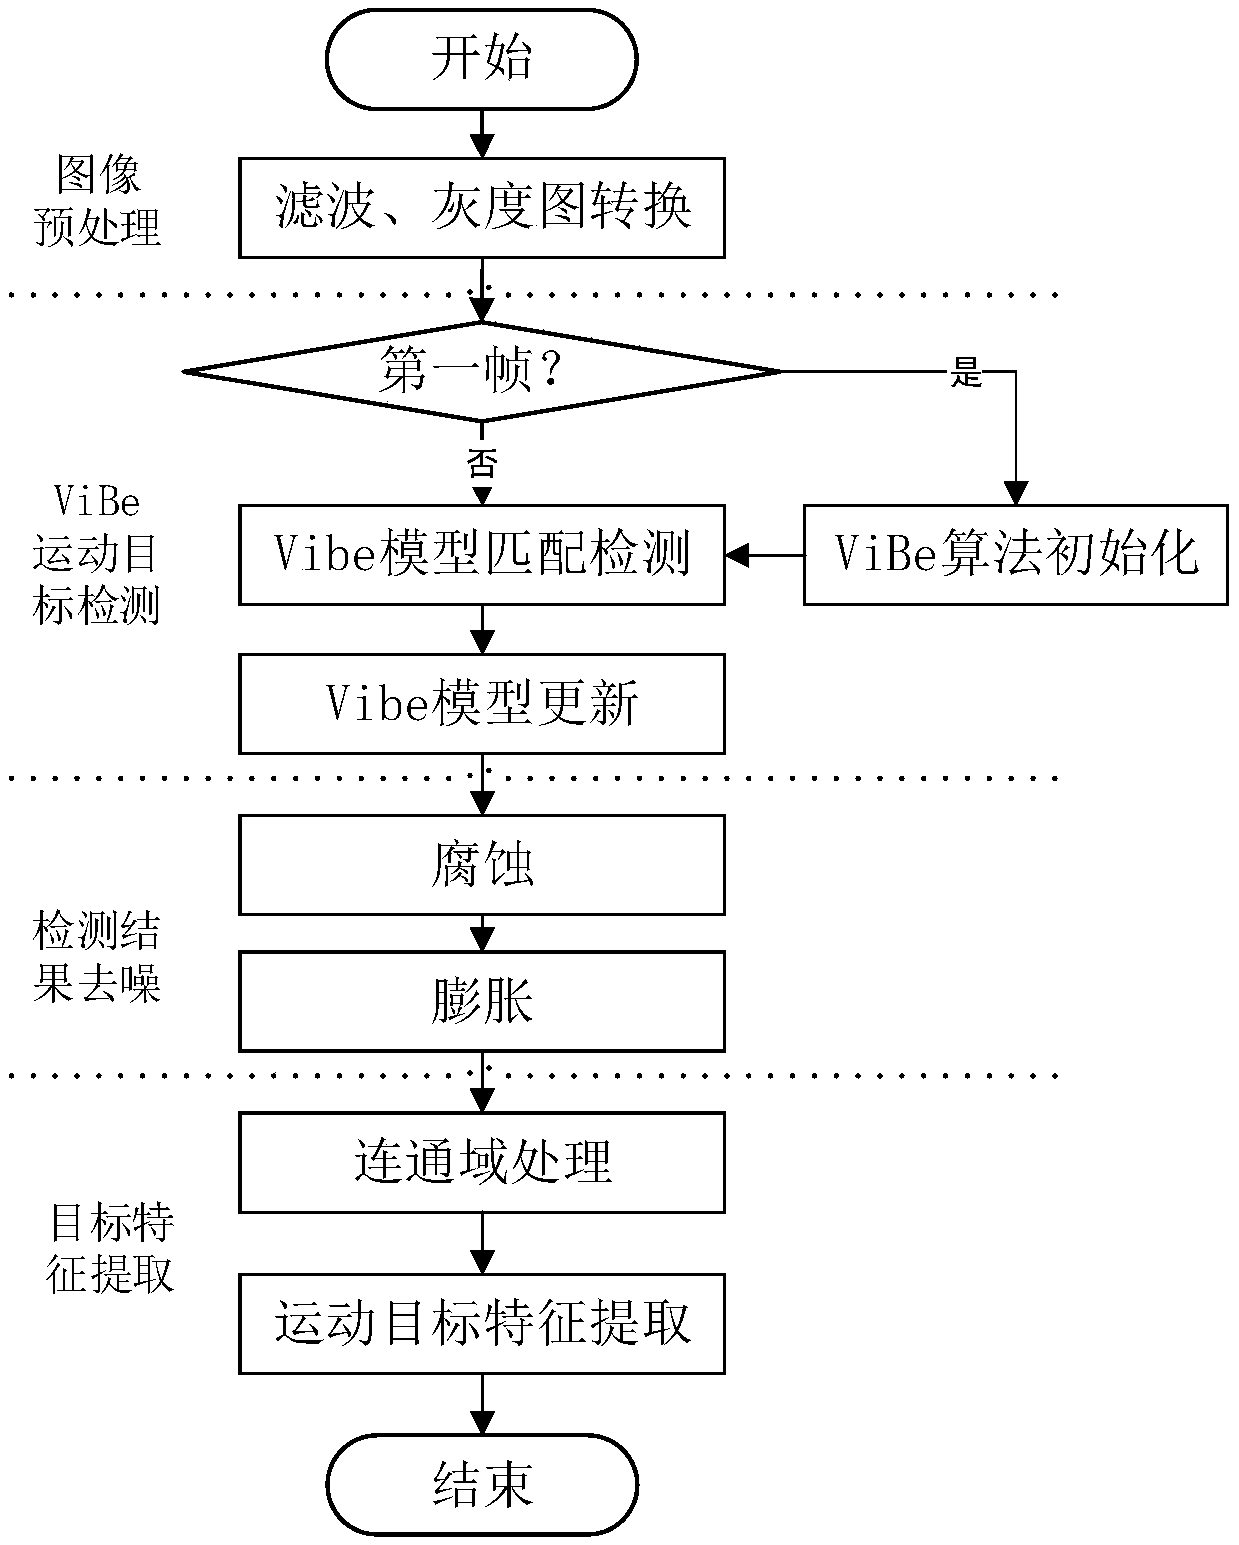 High altitude parabolic detection system and method based on computer vision